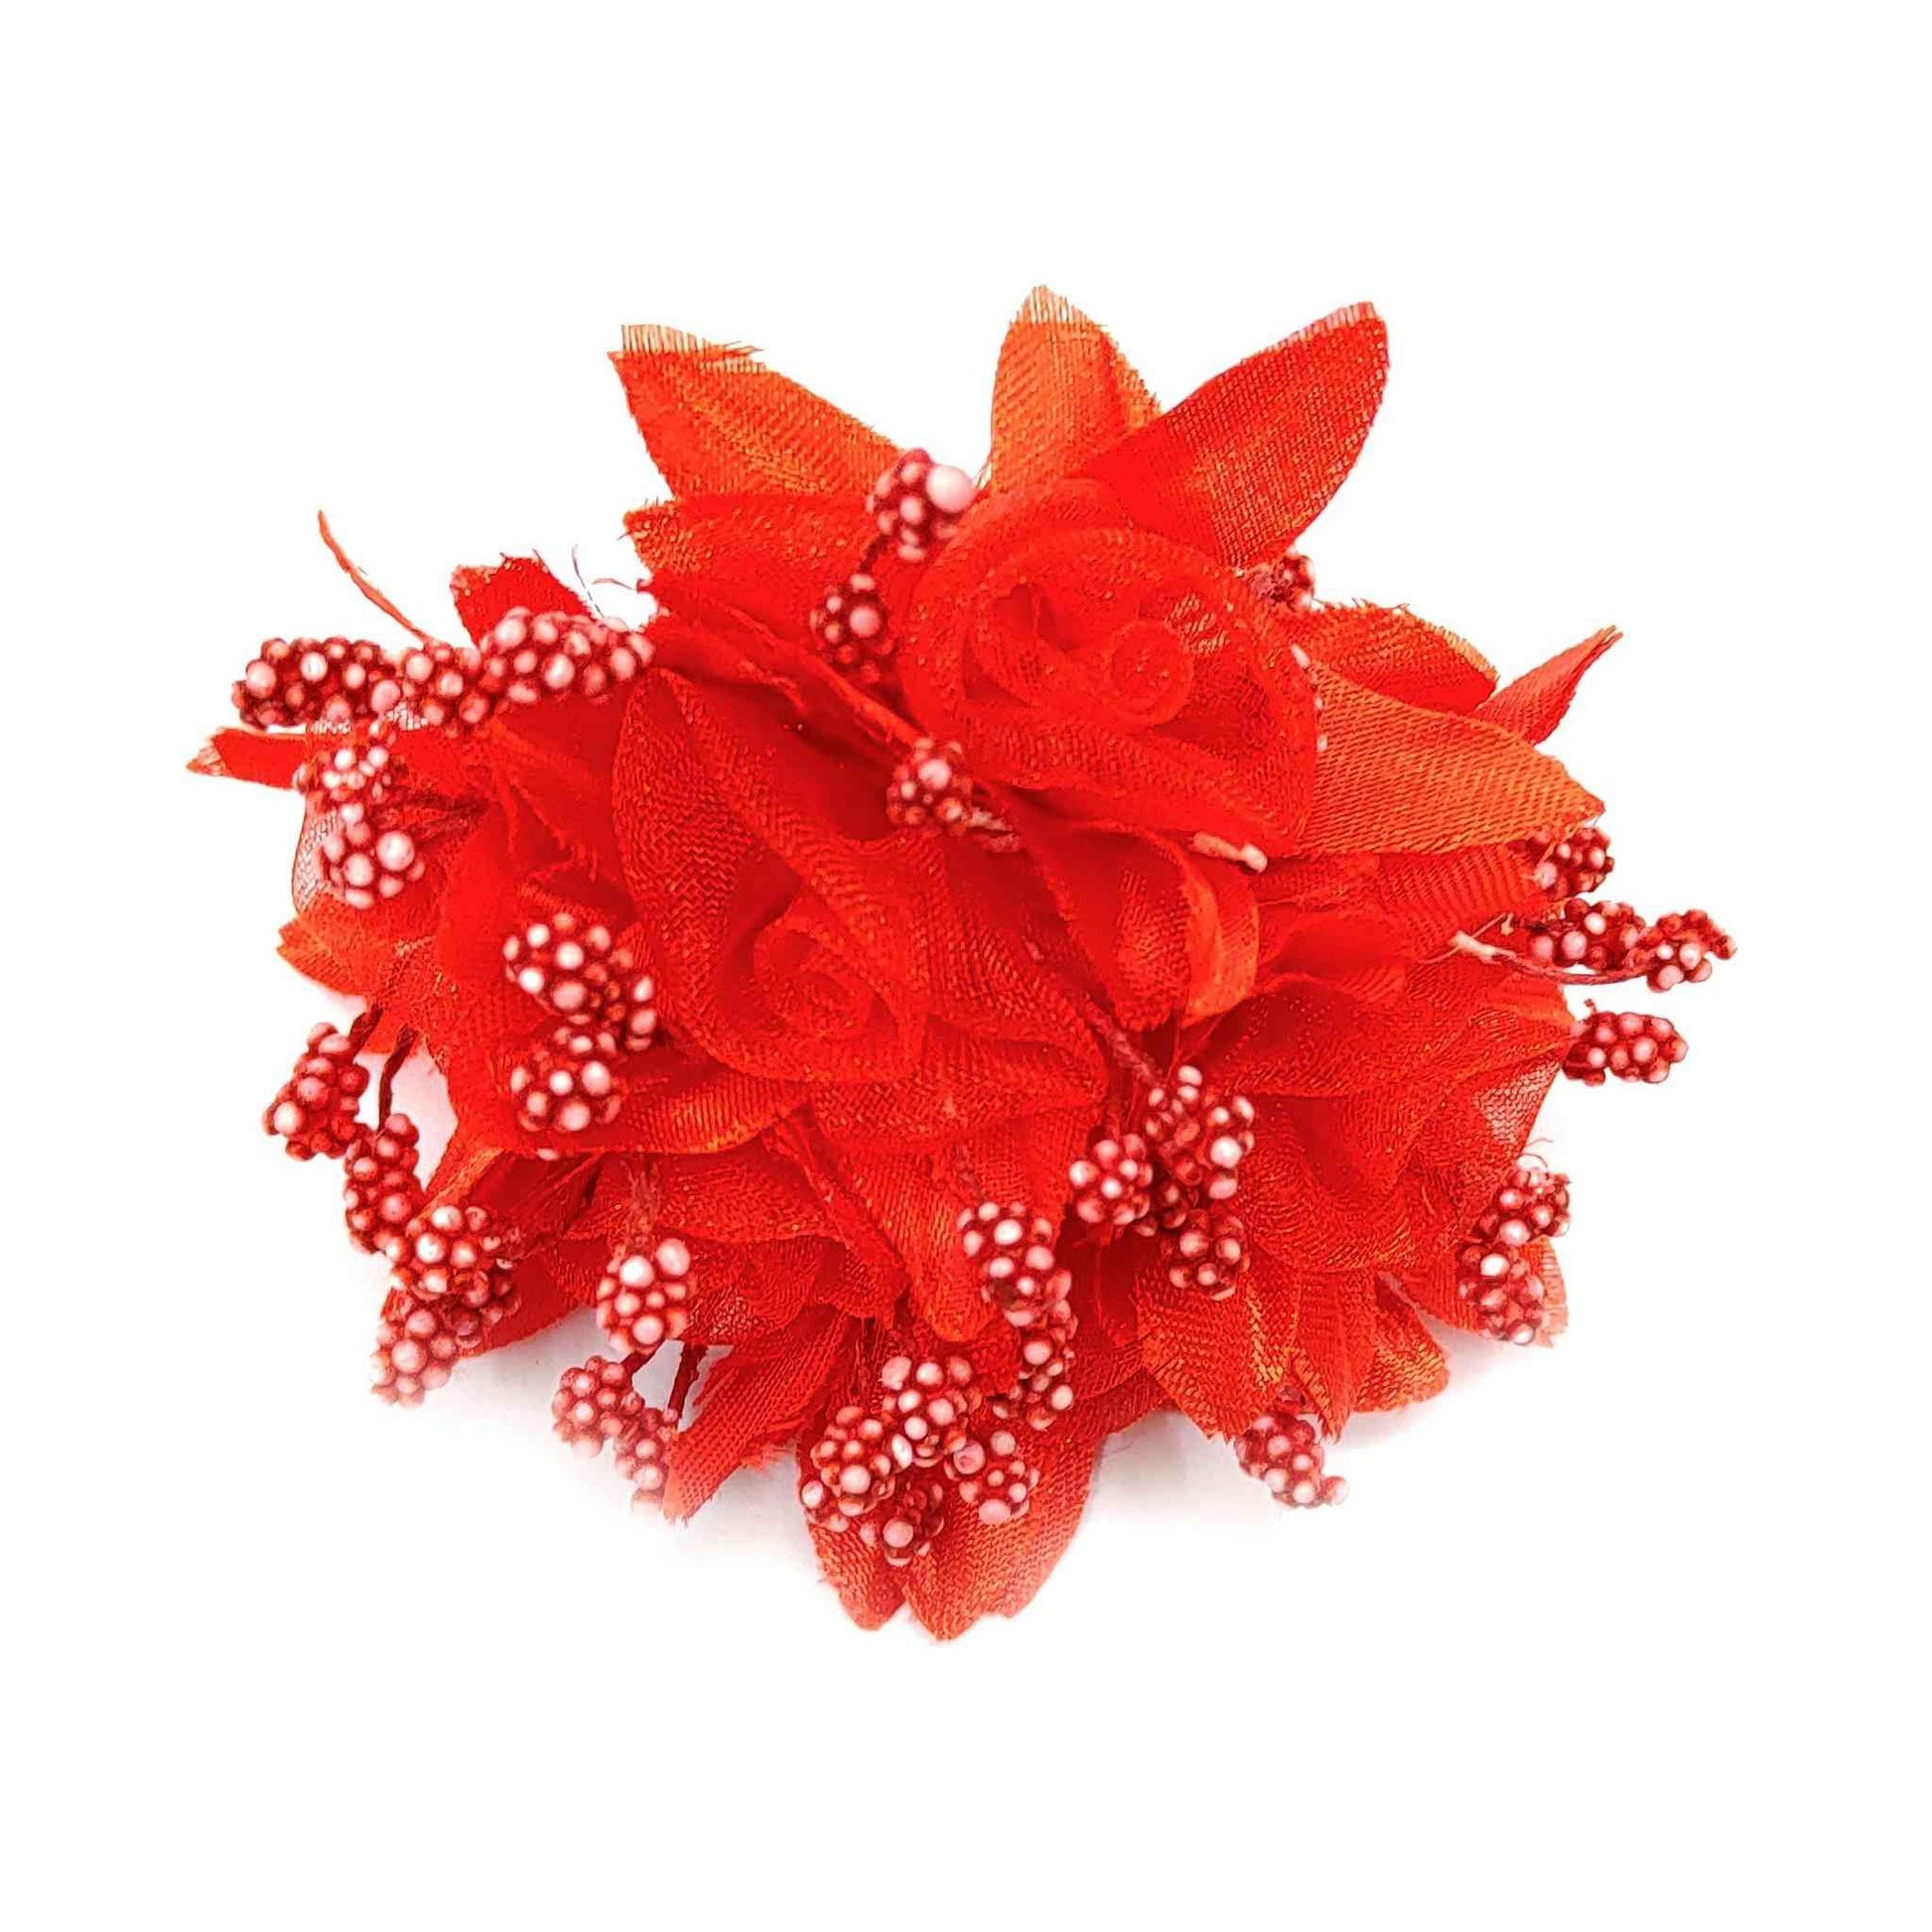 Indian Petals Beautiful Fabric Net Flowers with Buds for DIY Craft, Trouseau Packing or Decoration (Bunch of 12) - Design 47, Red - Indian Petals